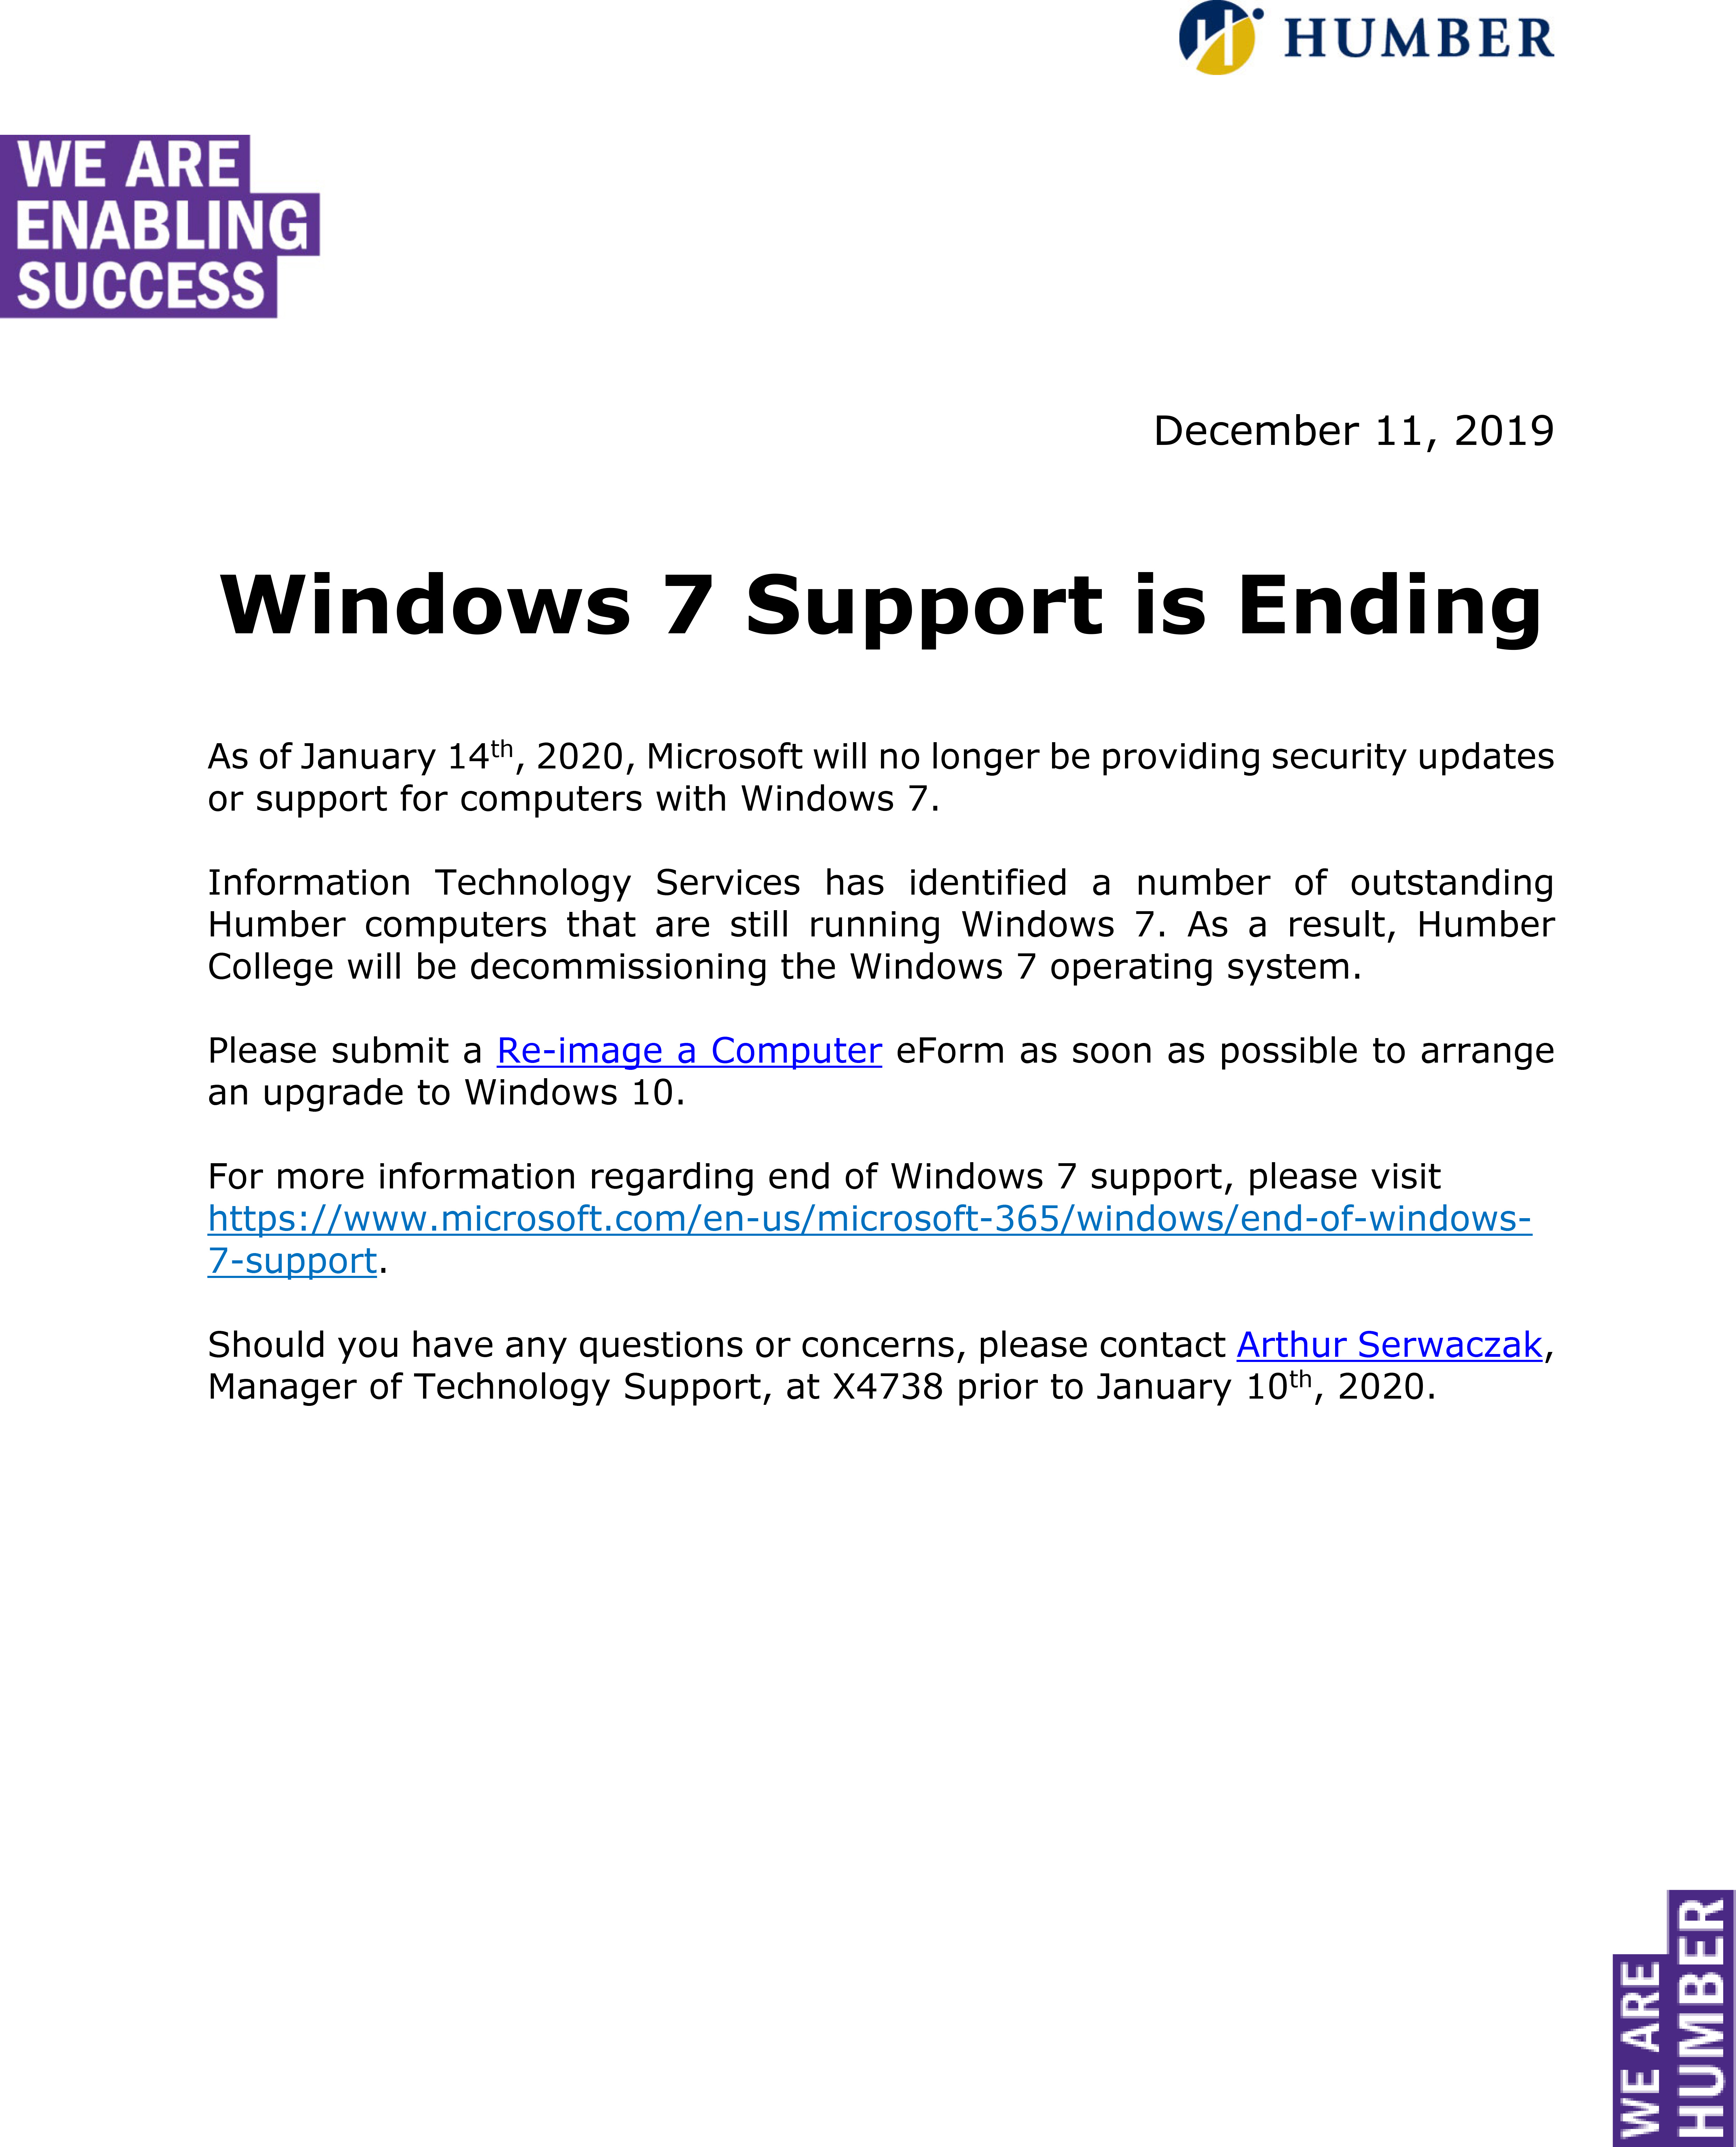 Windows 7 Support is Ending